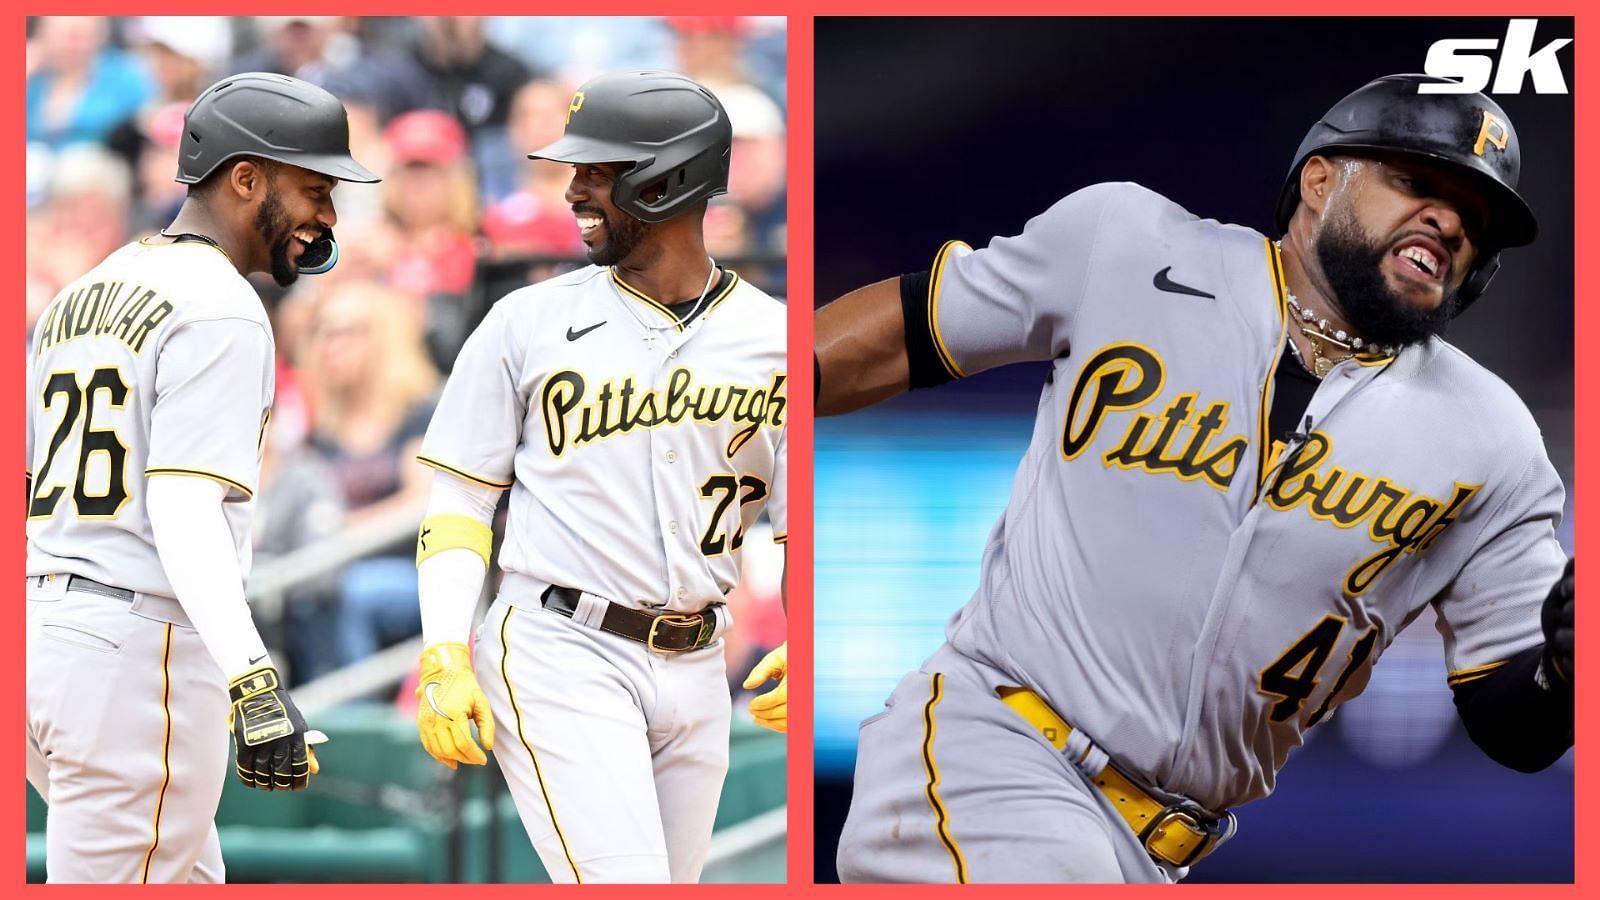 Baseball fans react to Pittsburgh Pirates&rsquo; prolonged slump after surprisingly hot start